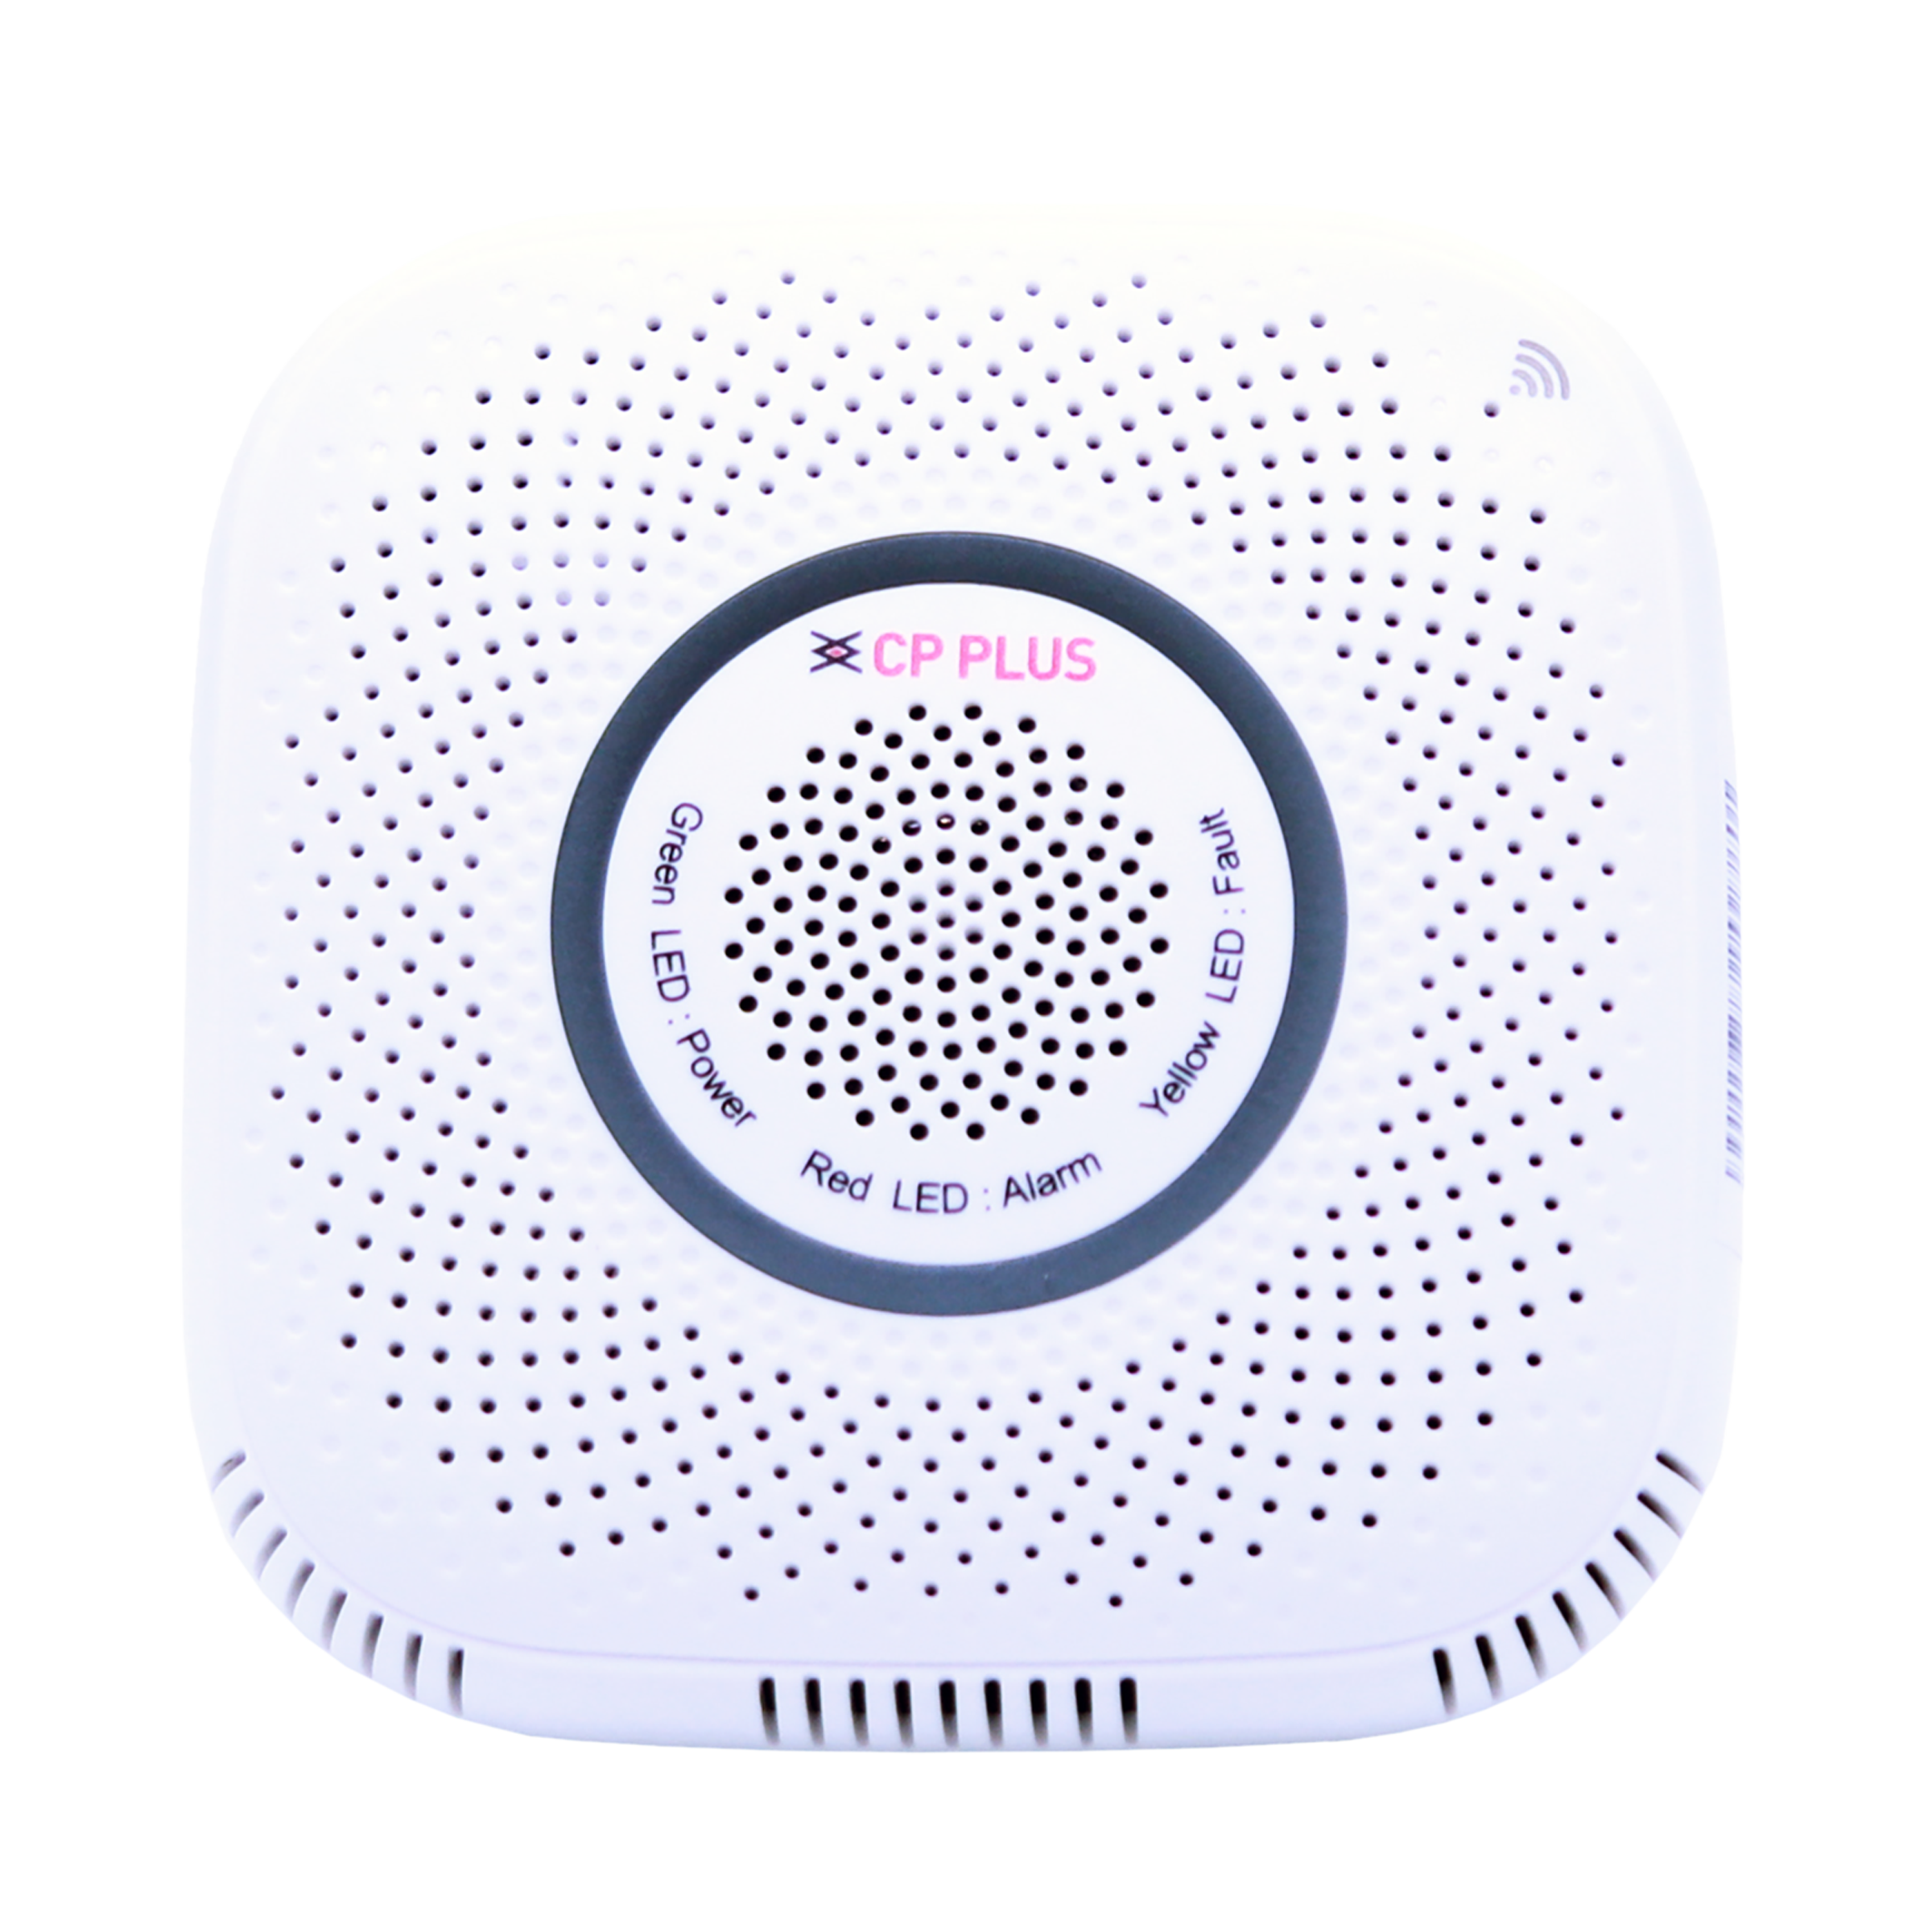 CP PLUS Smart WiFi Gas Detector (Voice Prompt Support, CP-HAS-GM03-W, White)